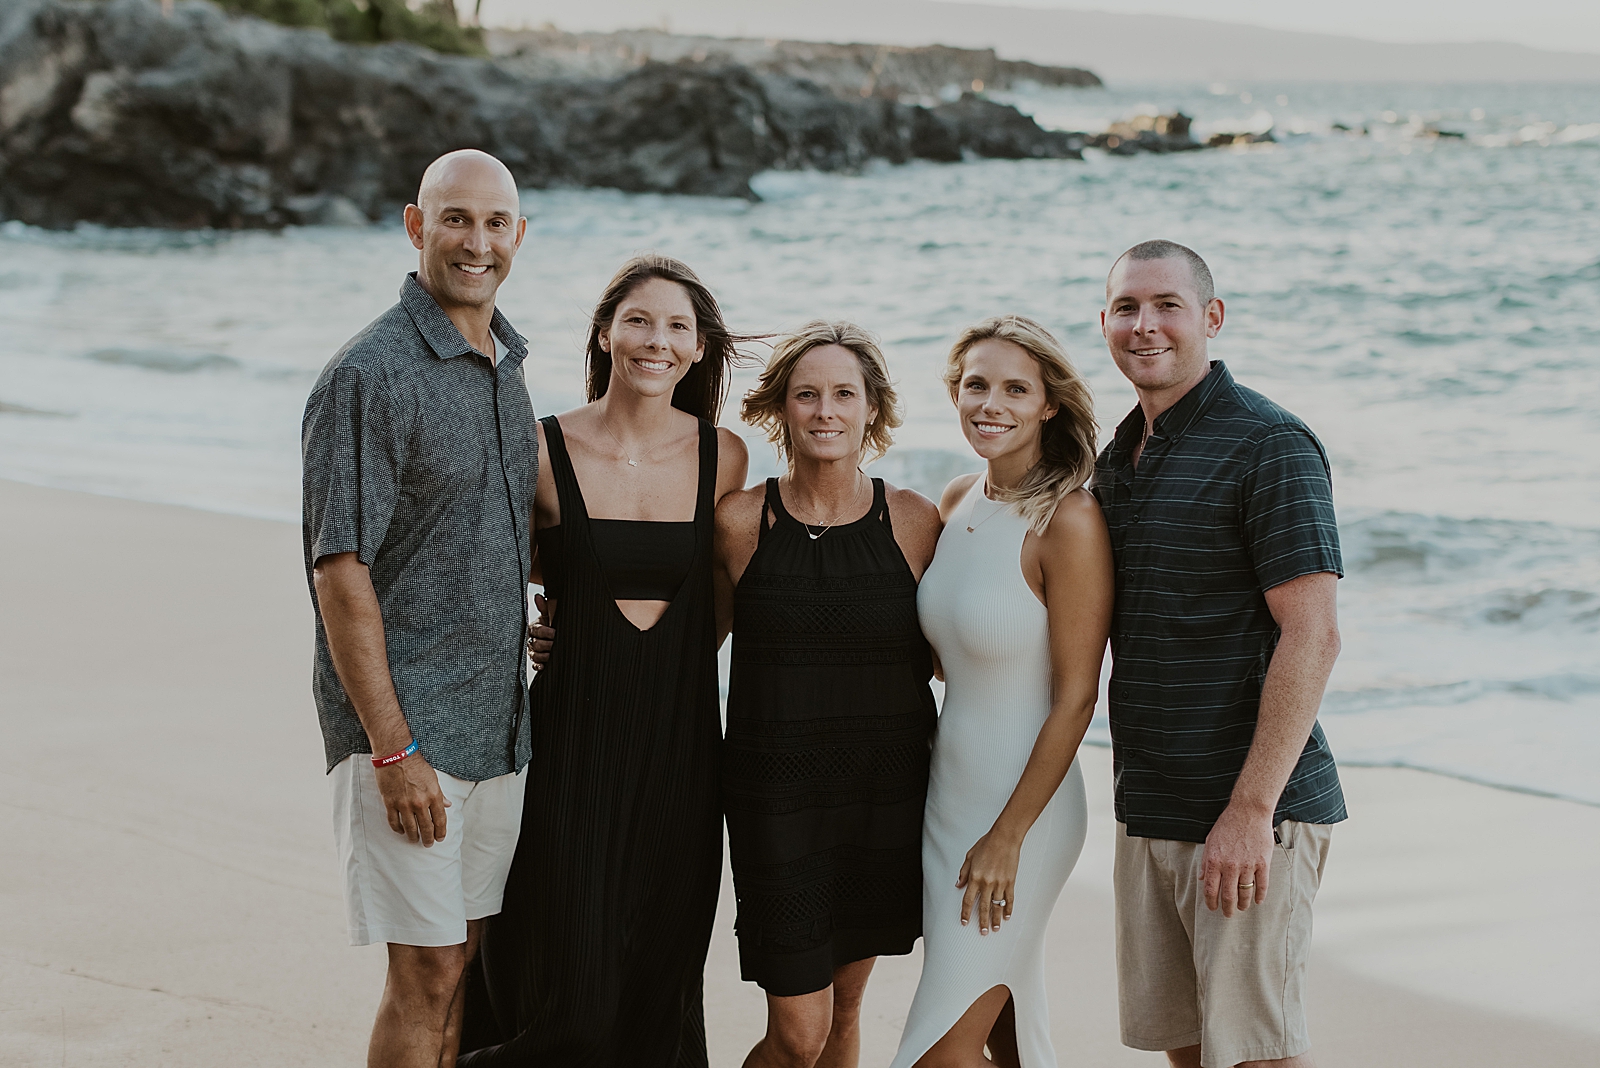 Portrait of family with extended family by the ocean shoreline